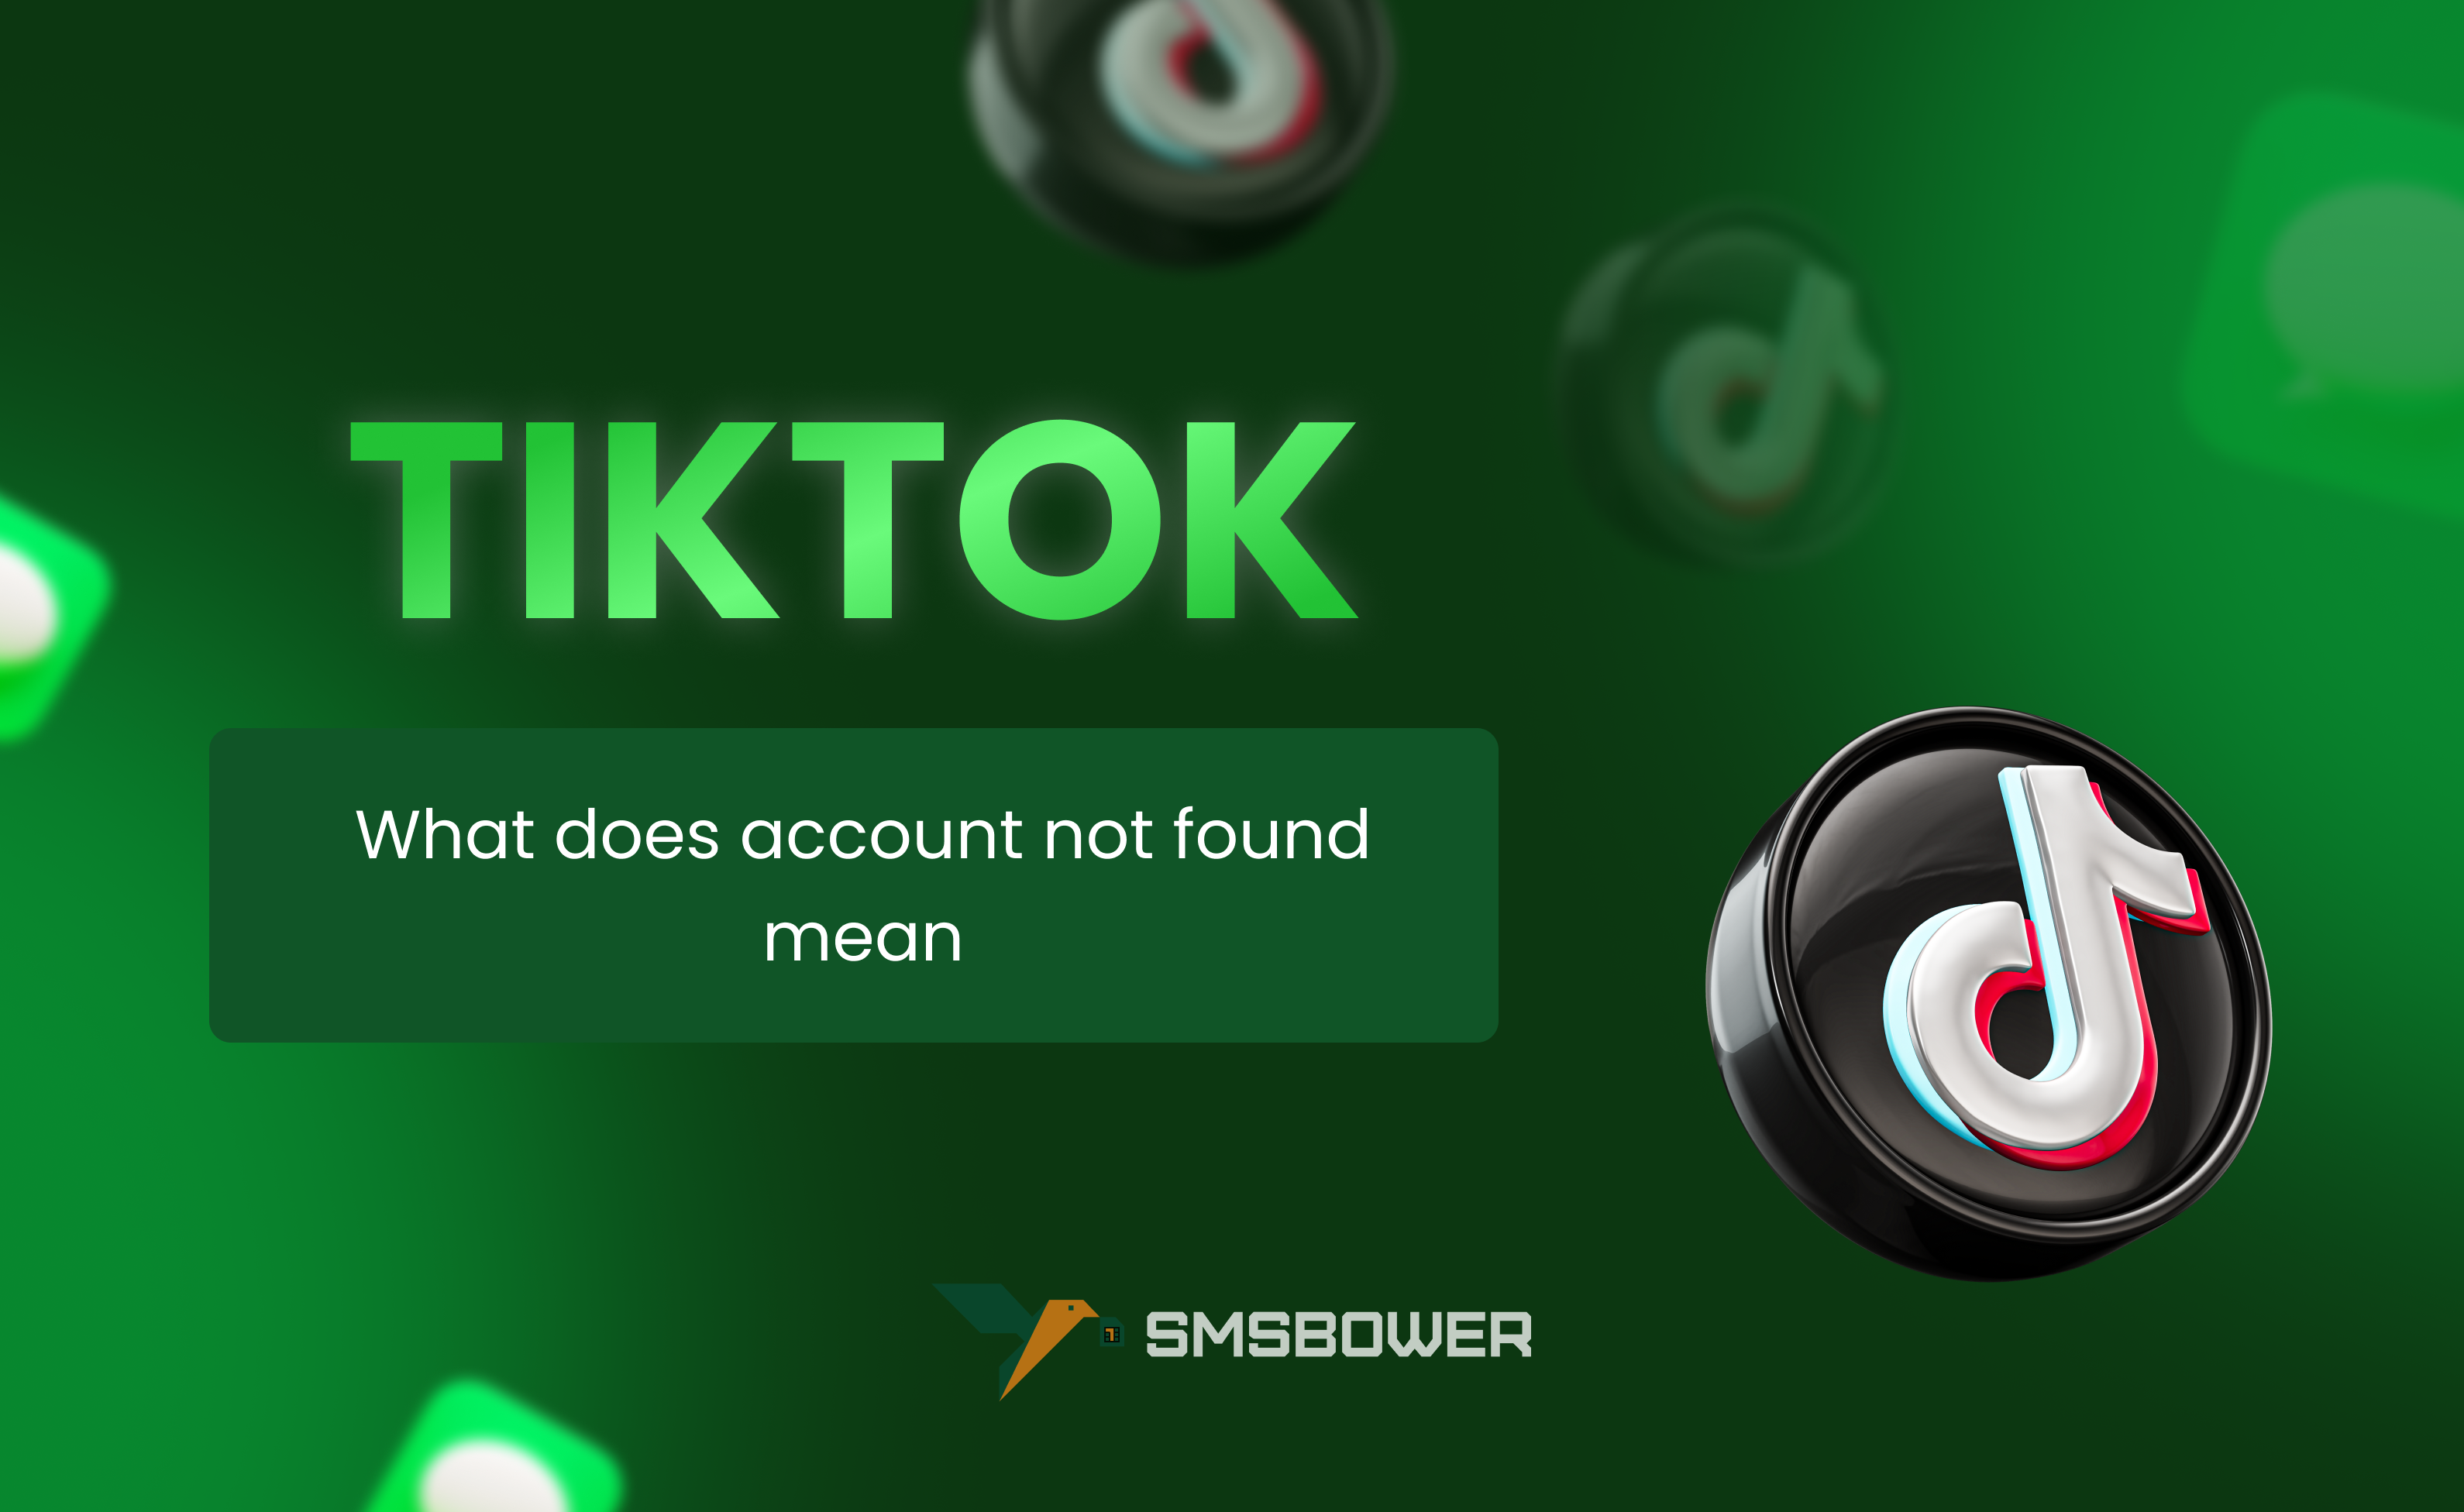 How to Resolve Account Not Found on TikTok Issue Using SMSBOWER